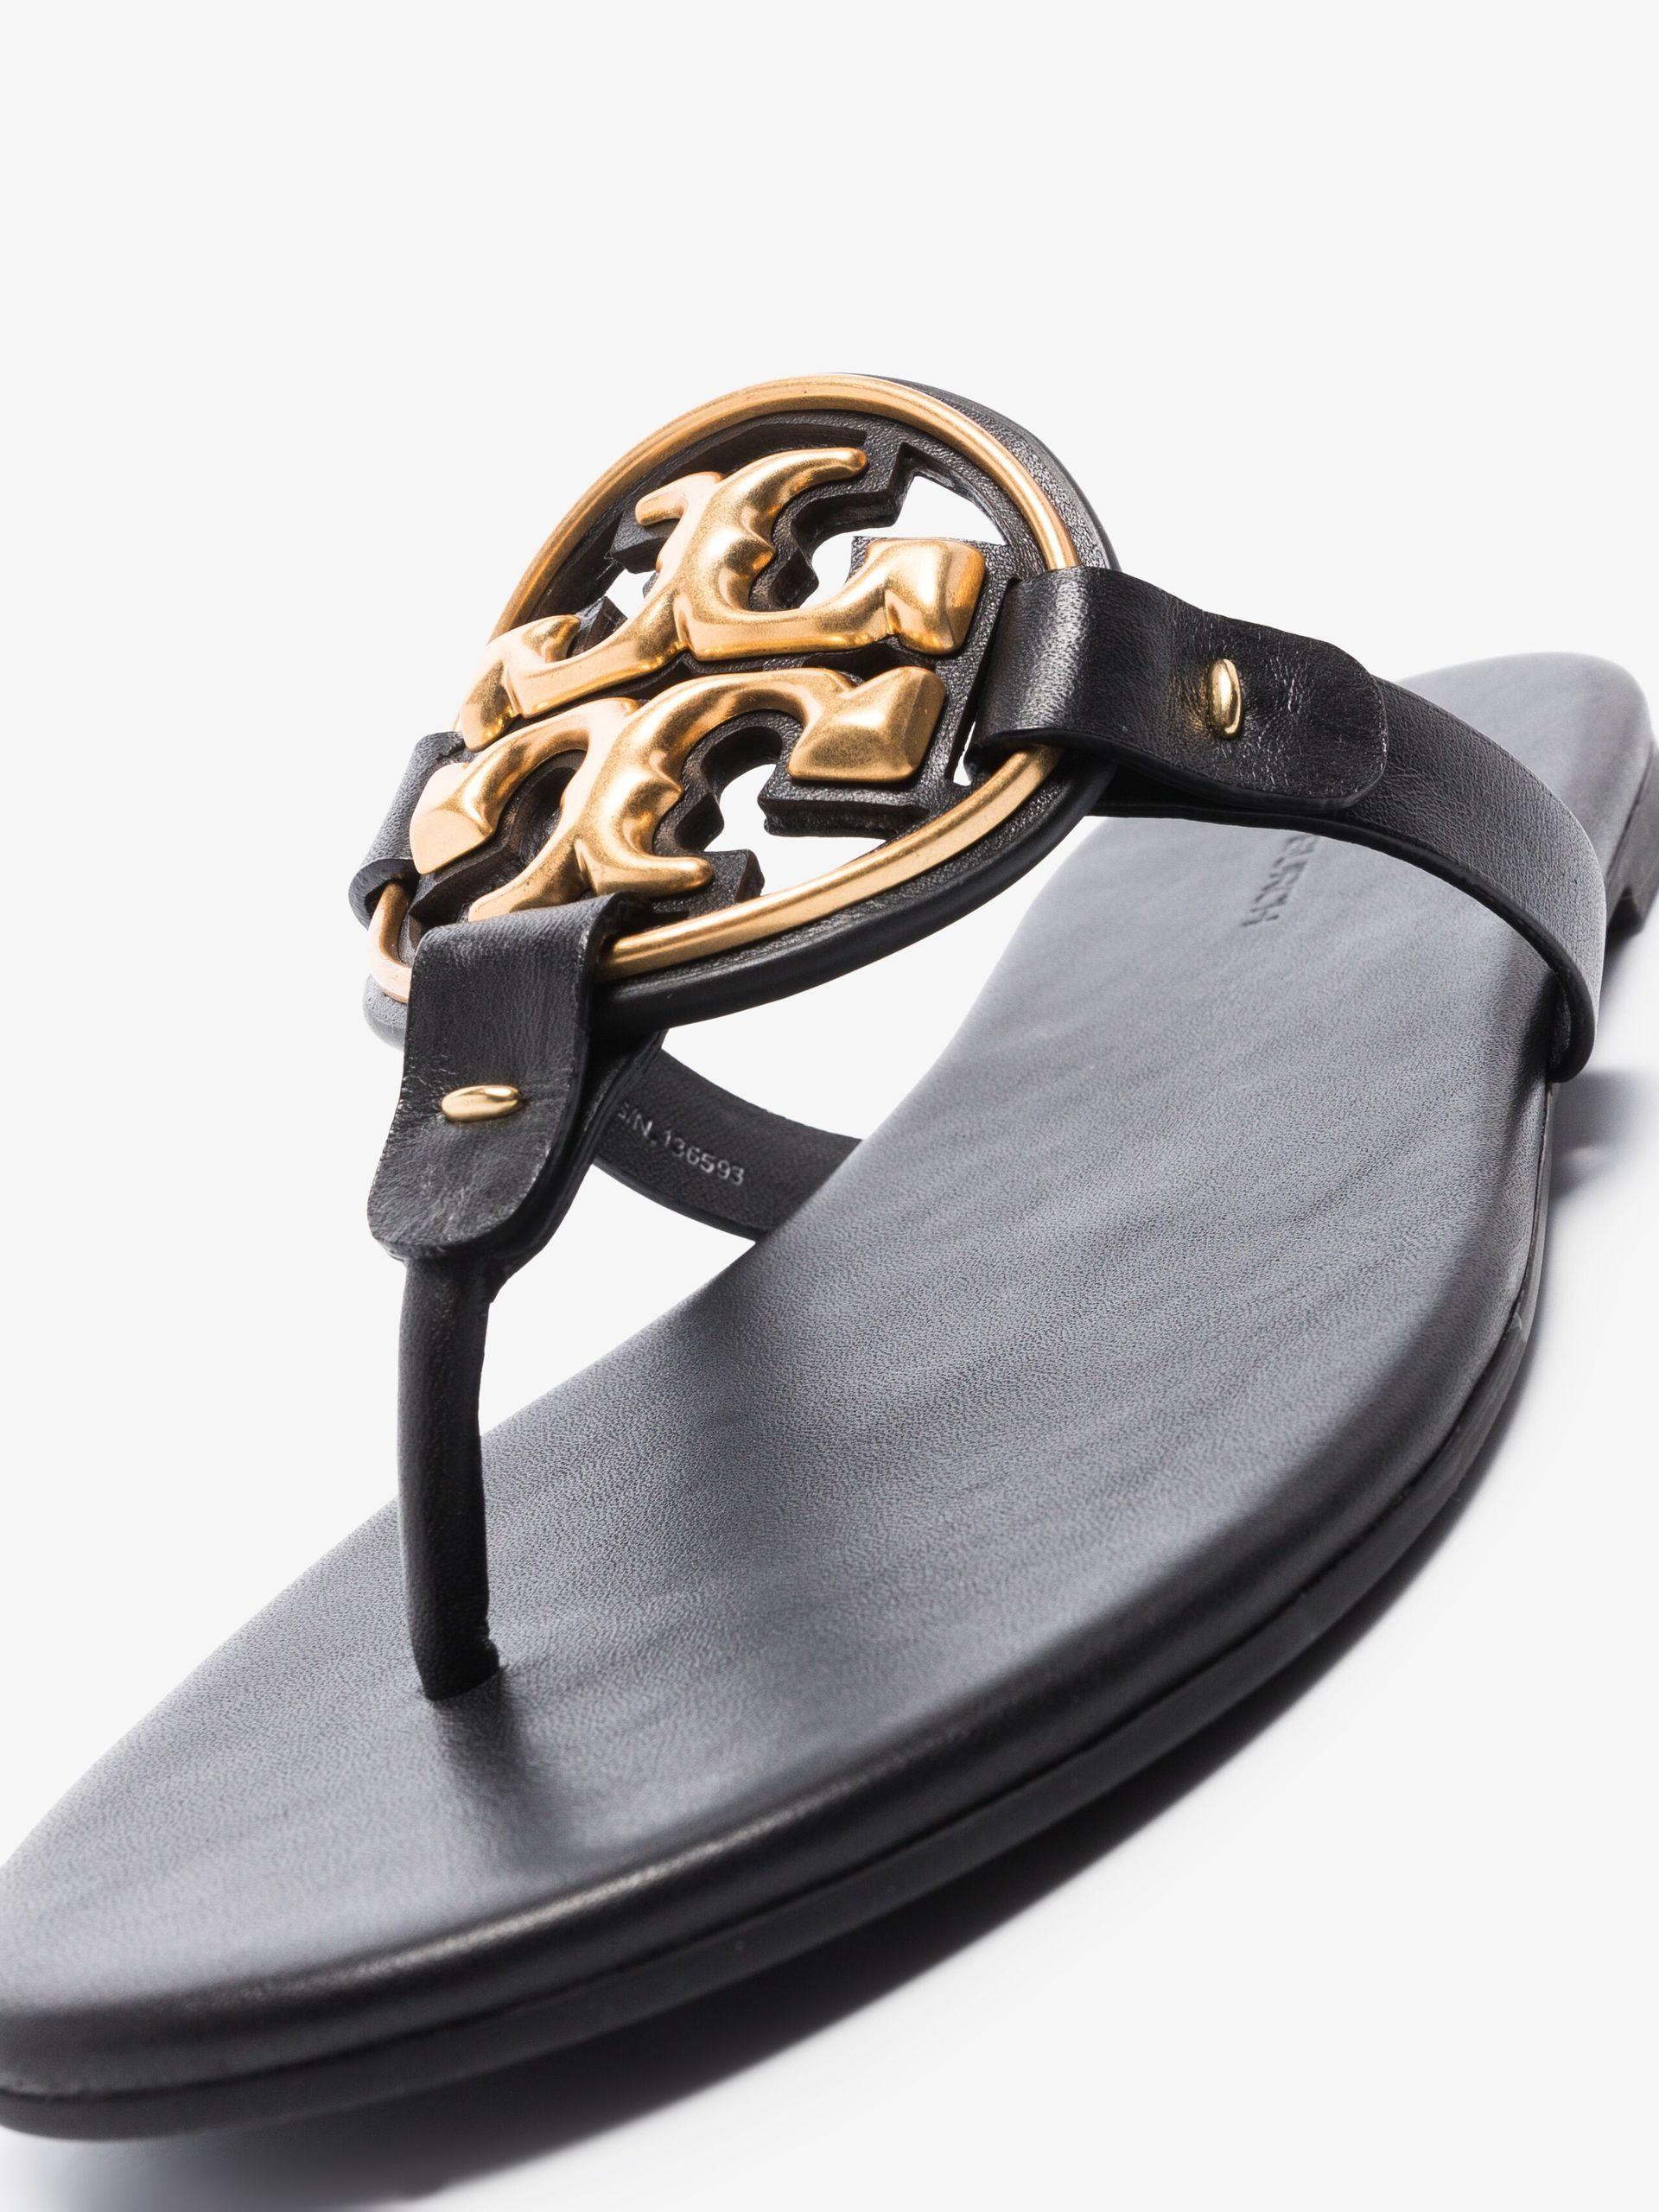 Tory Burch Miller Metal Double T Soft Sandals in Black | Lyst